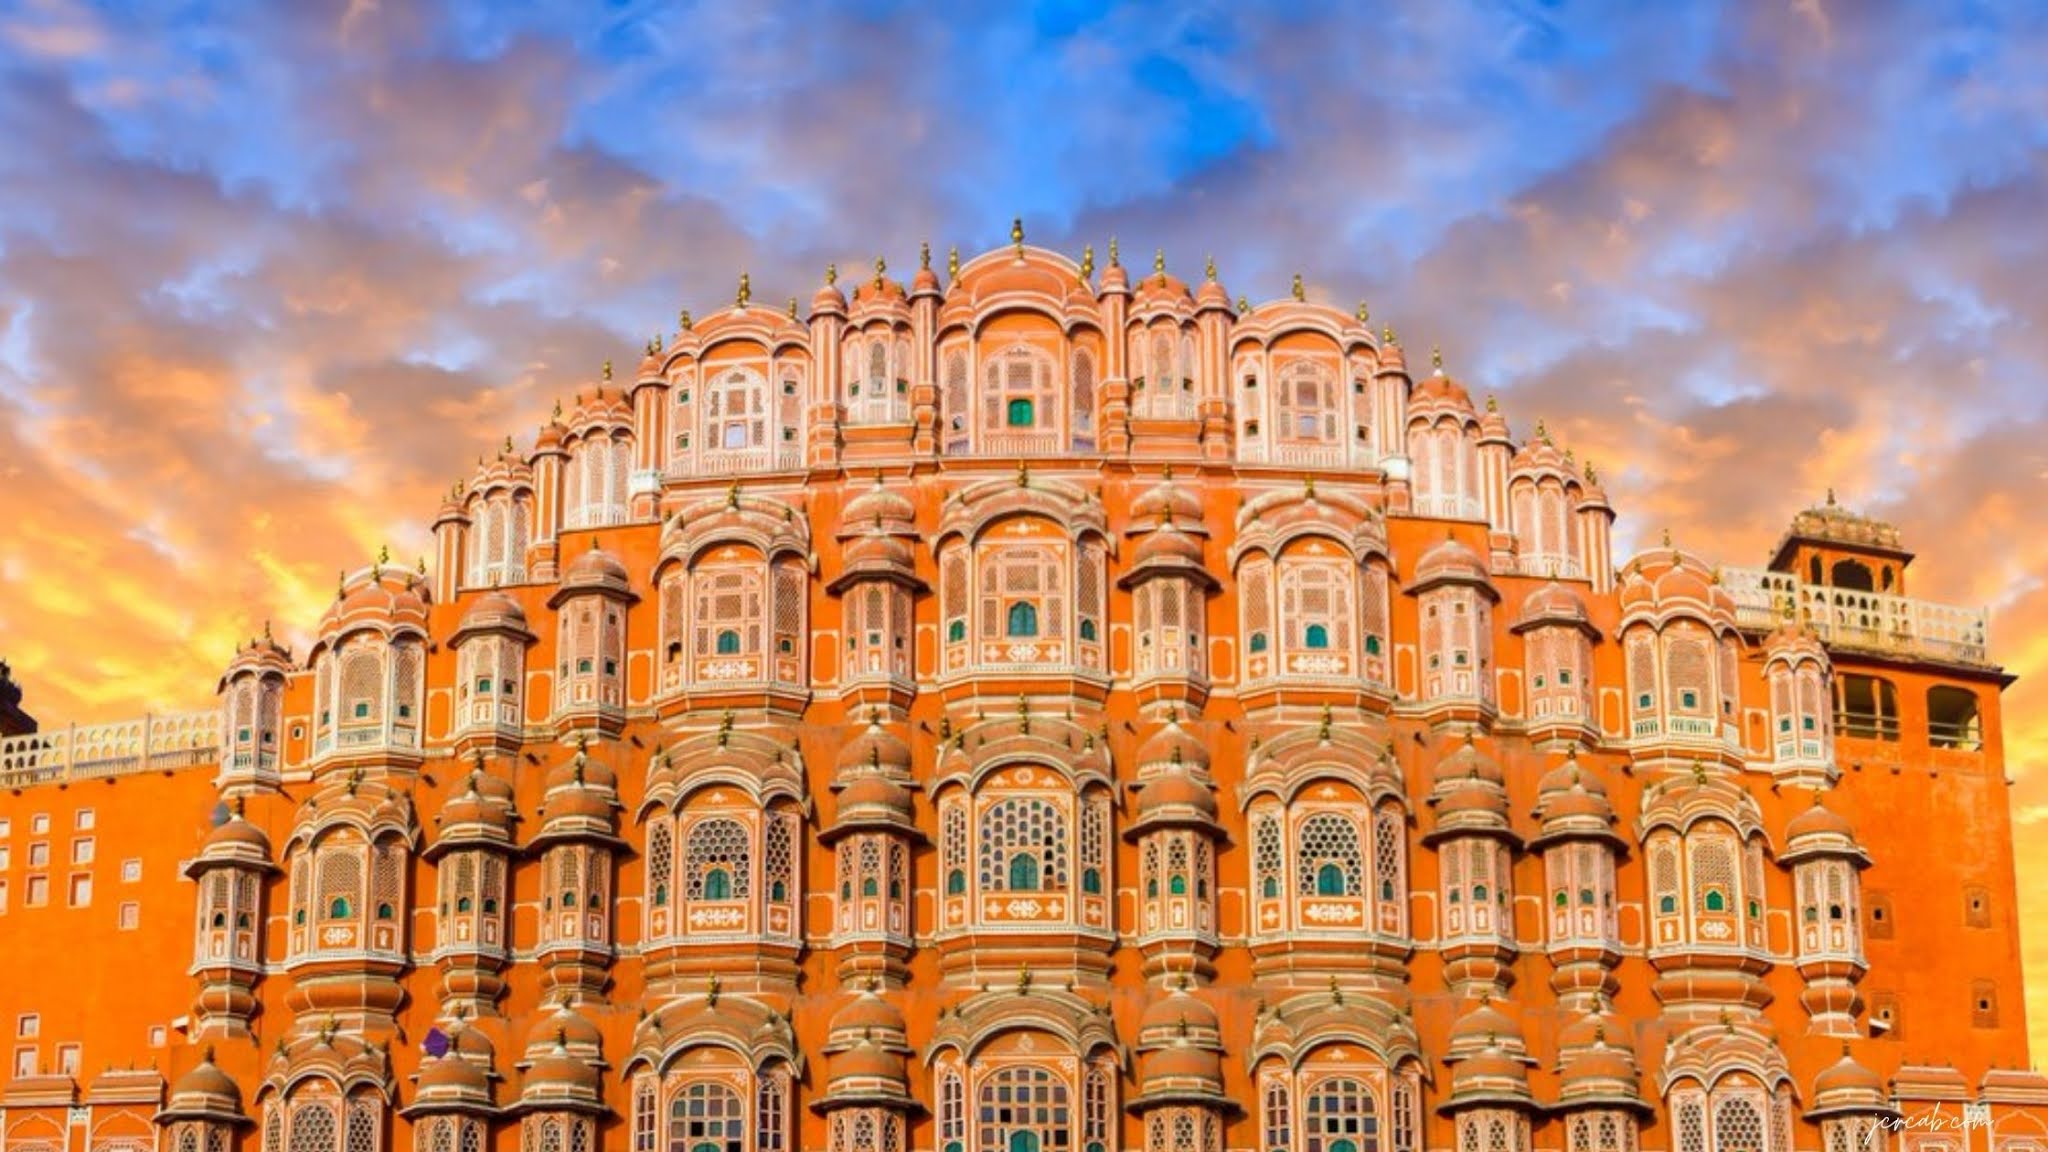 Why is it called Hawa Mahal?